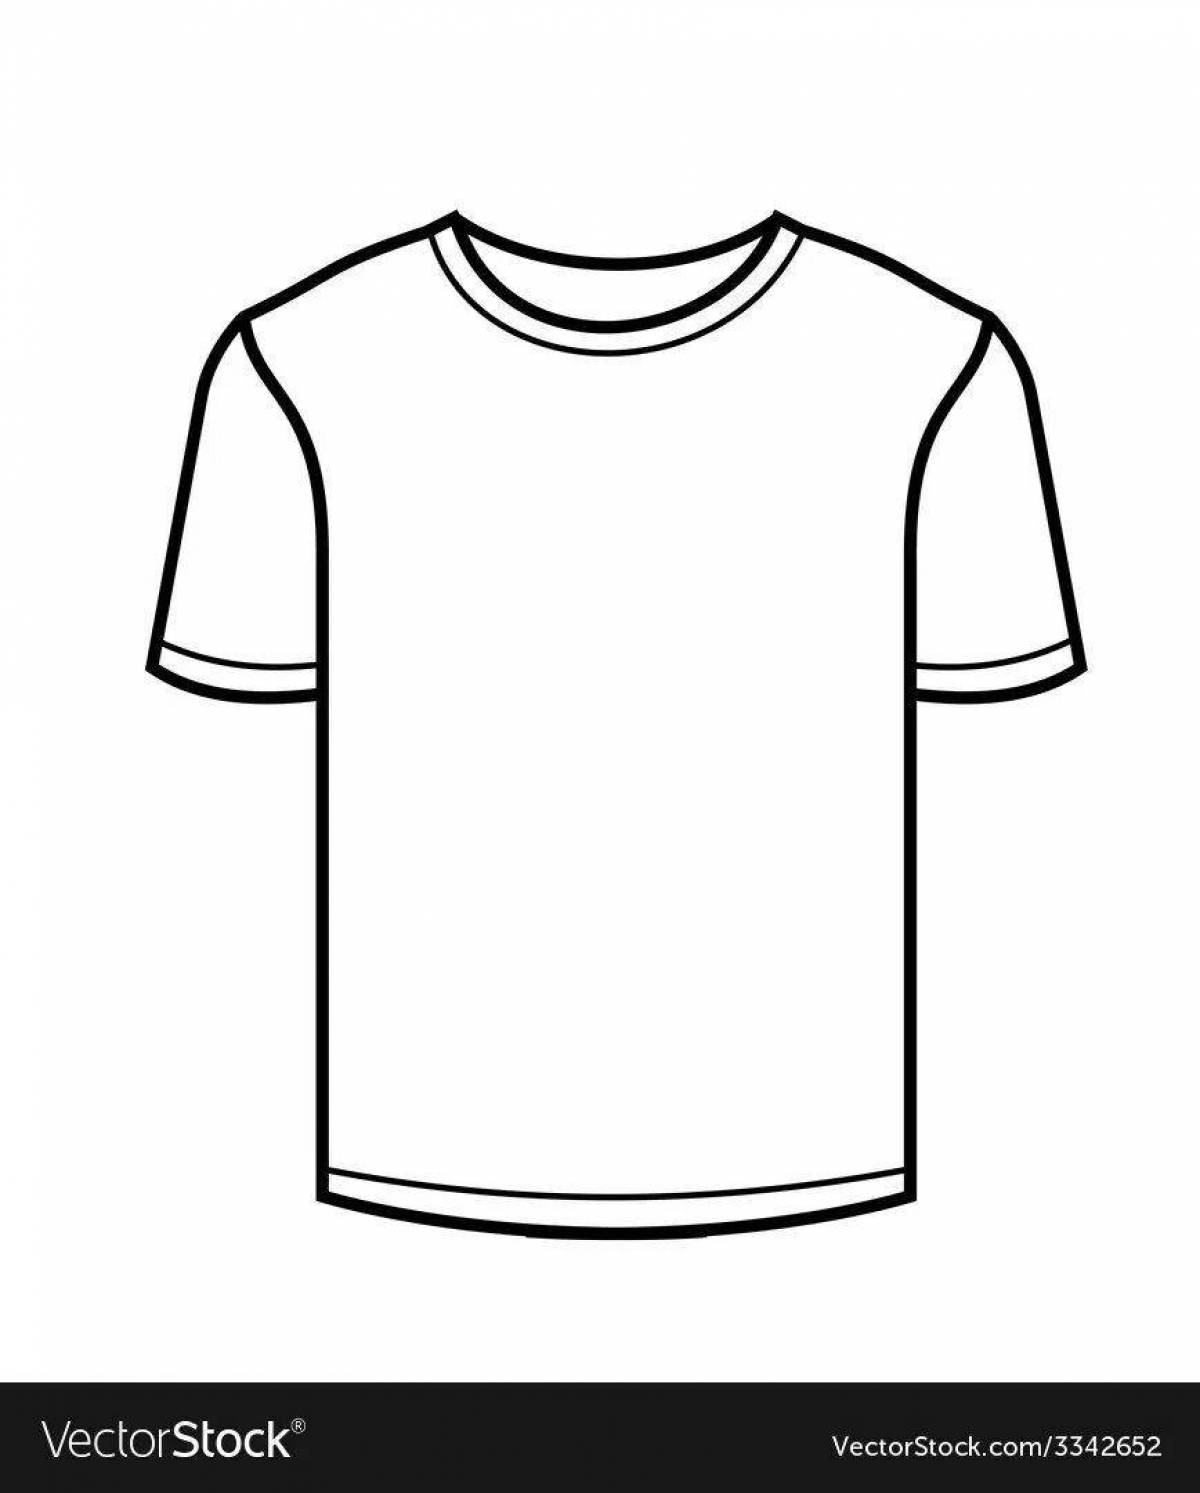 Colorful pre-k t-shirt coloring page